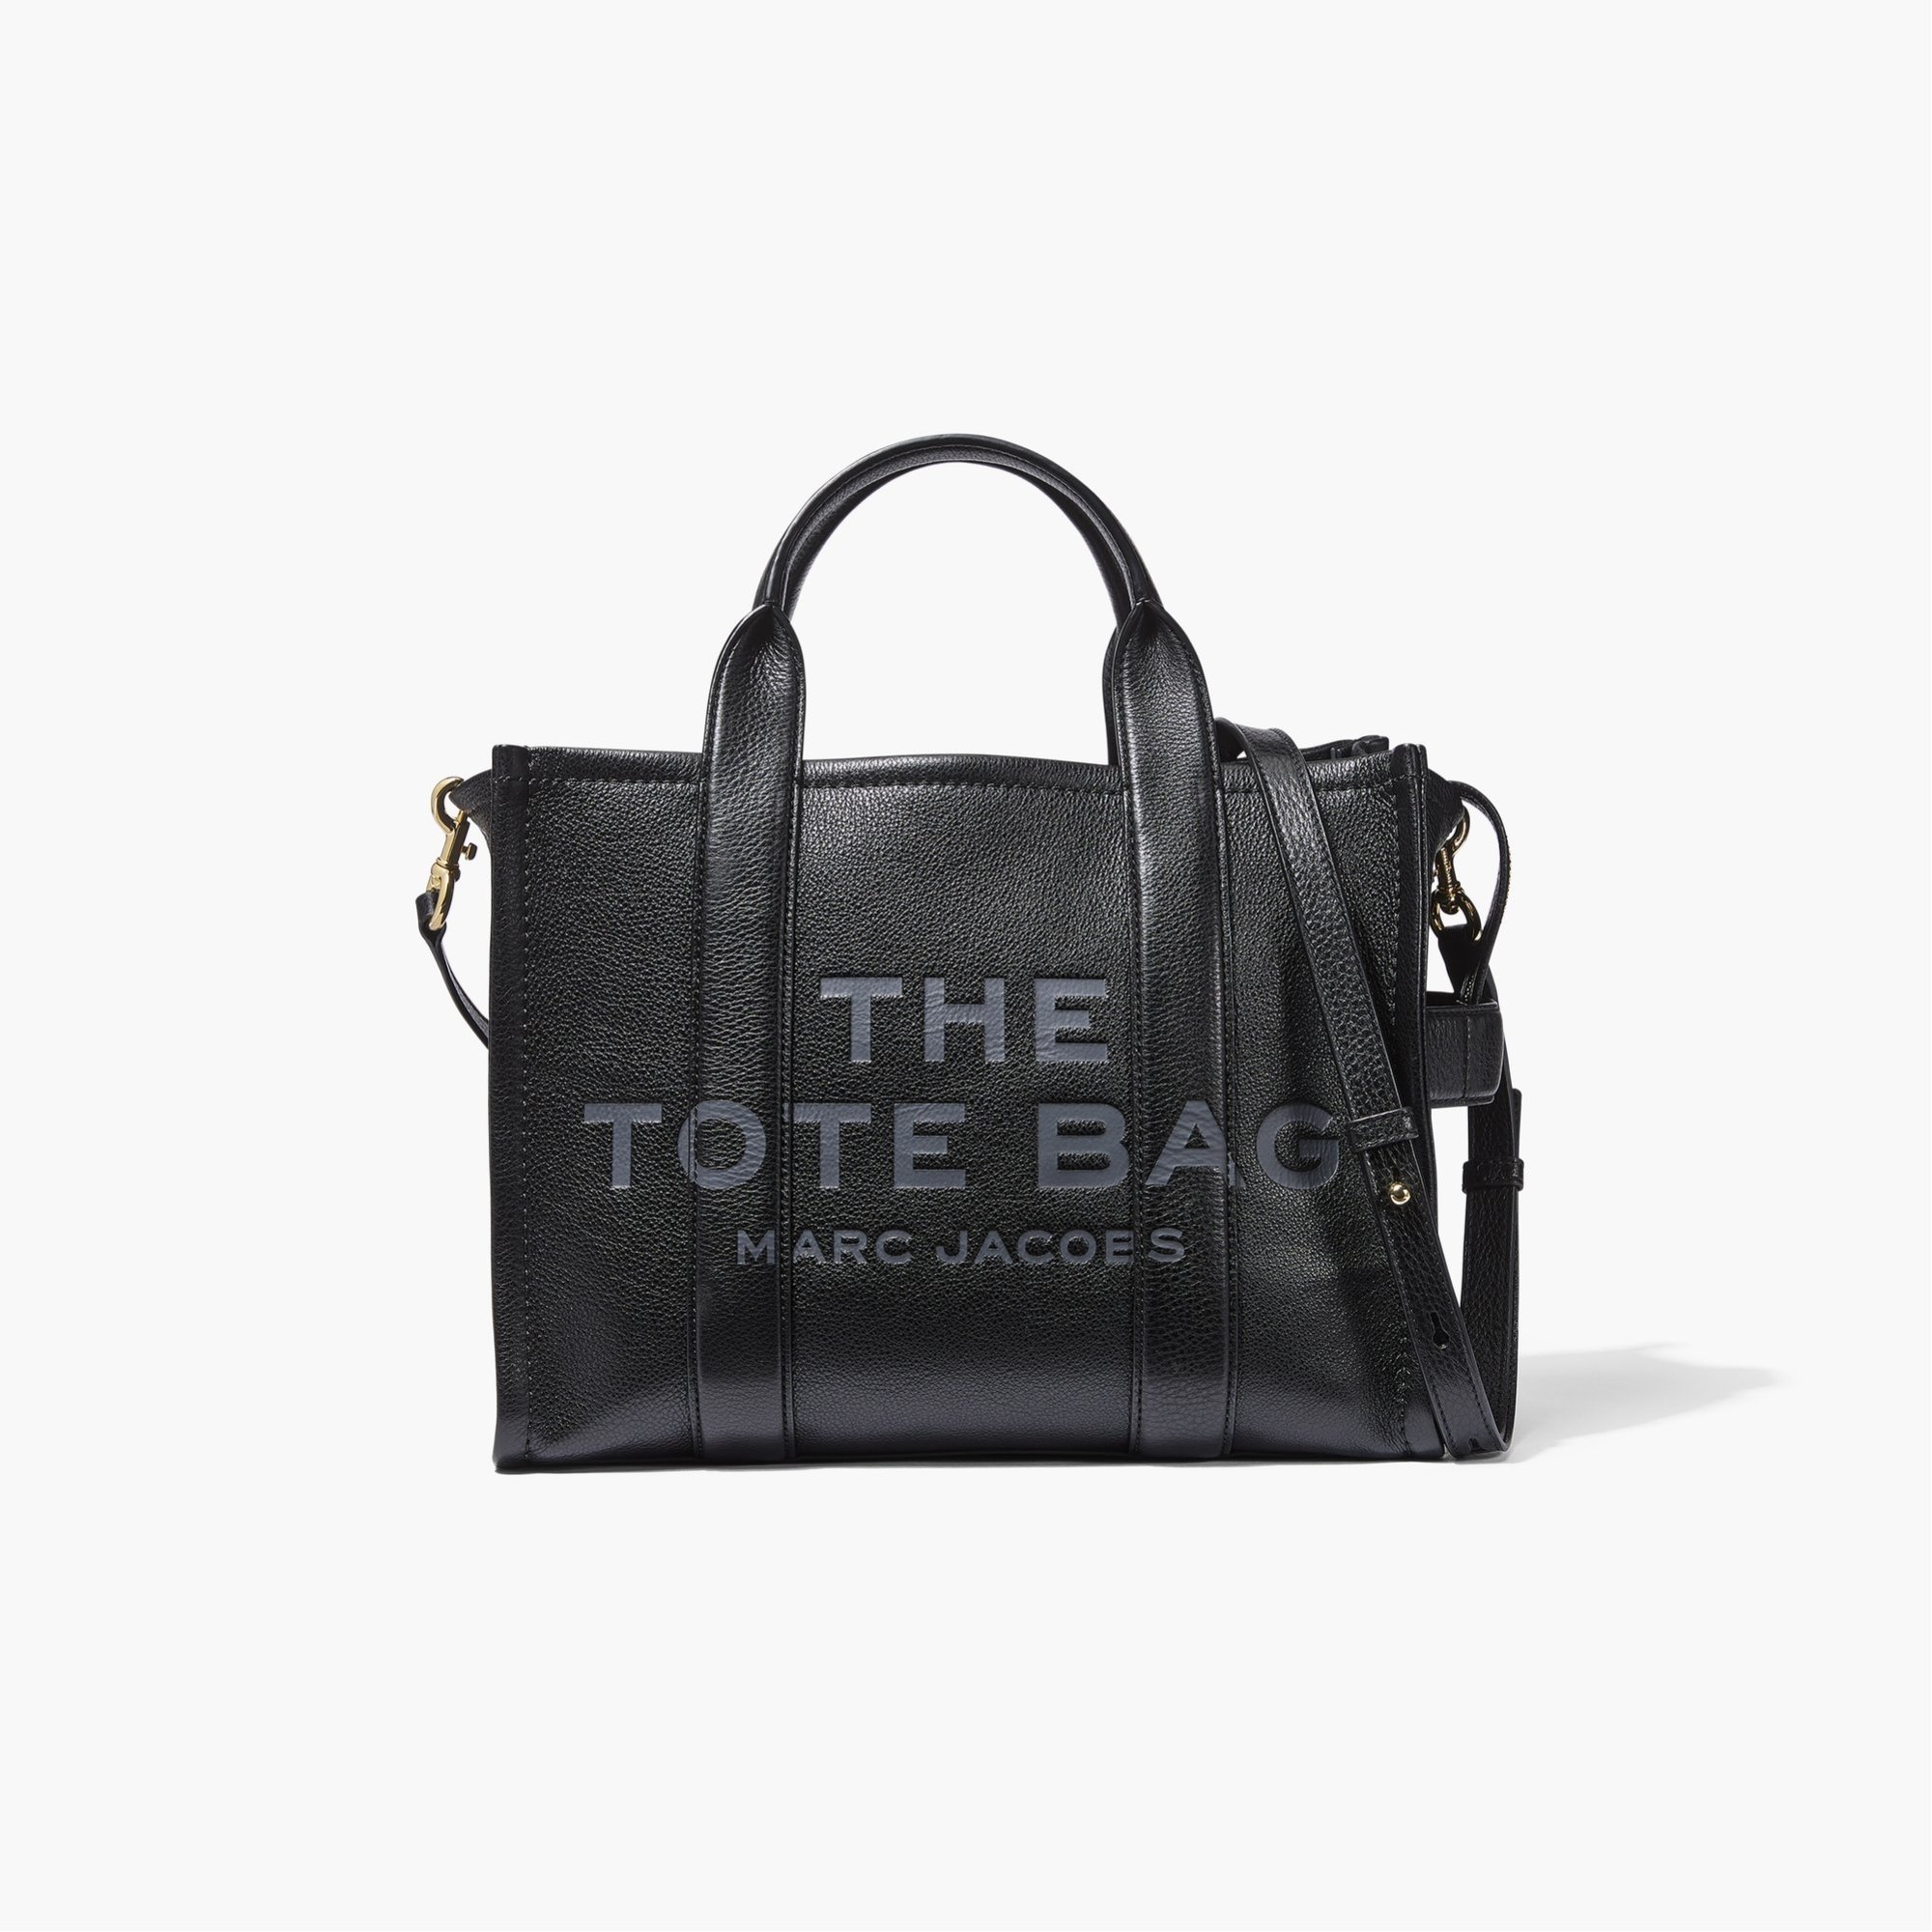 THE LEATHER SMALL TOTE BAG/ザ レザー スモール トートバッグ